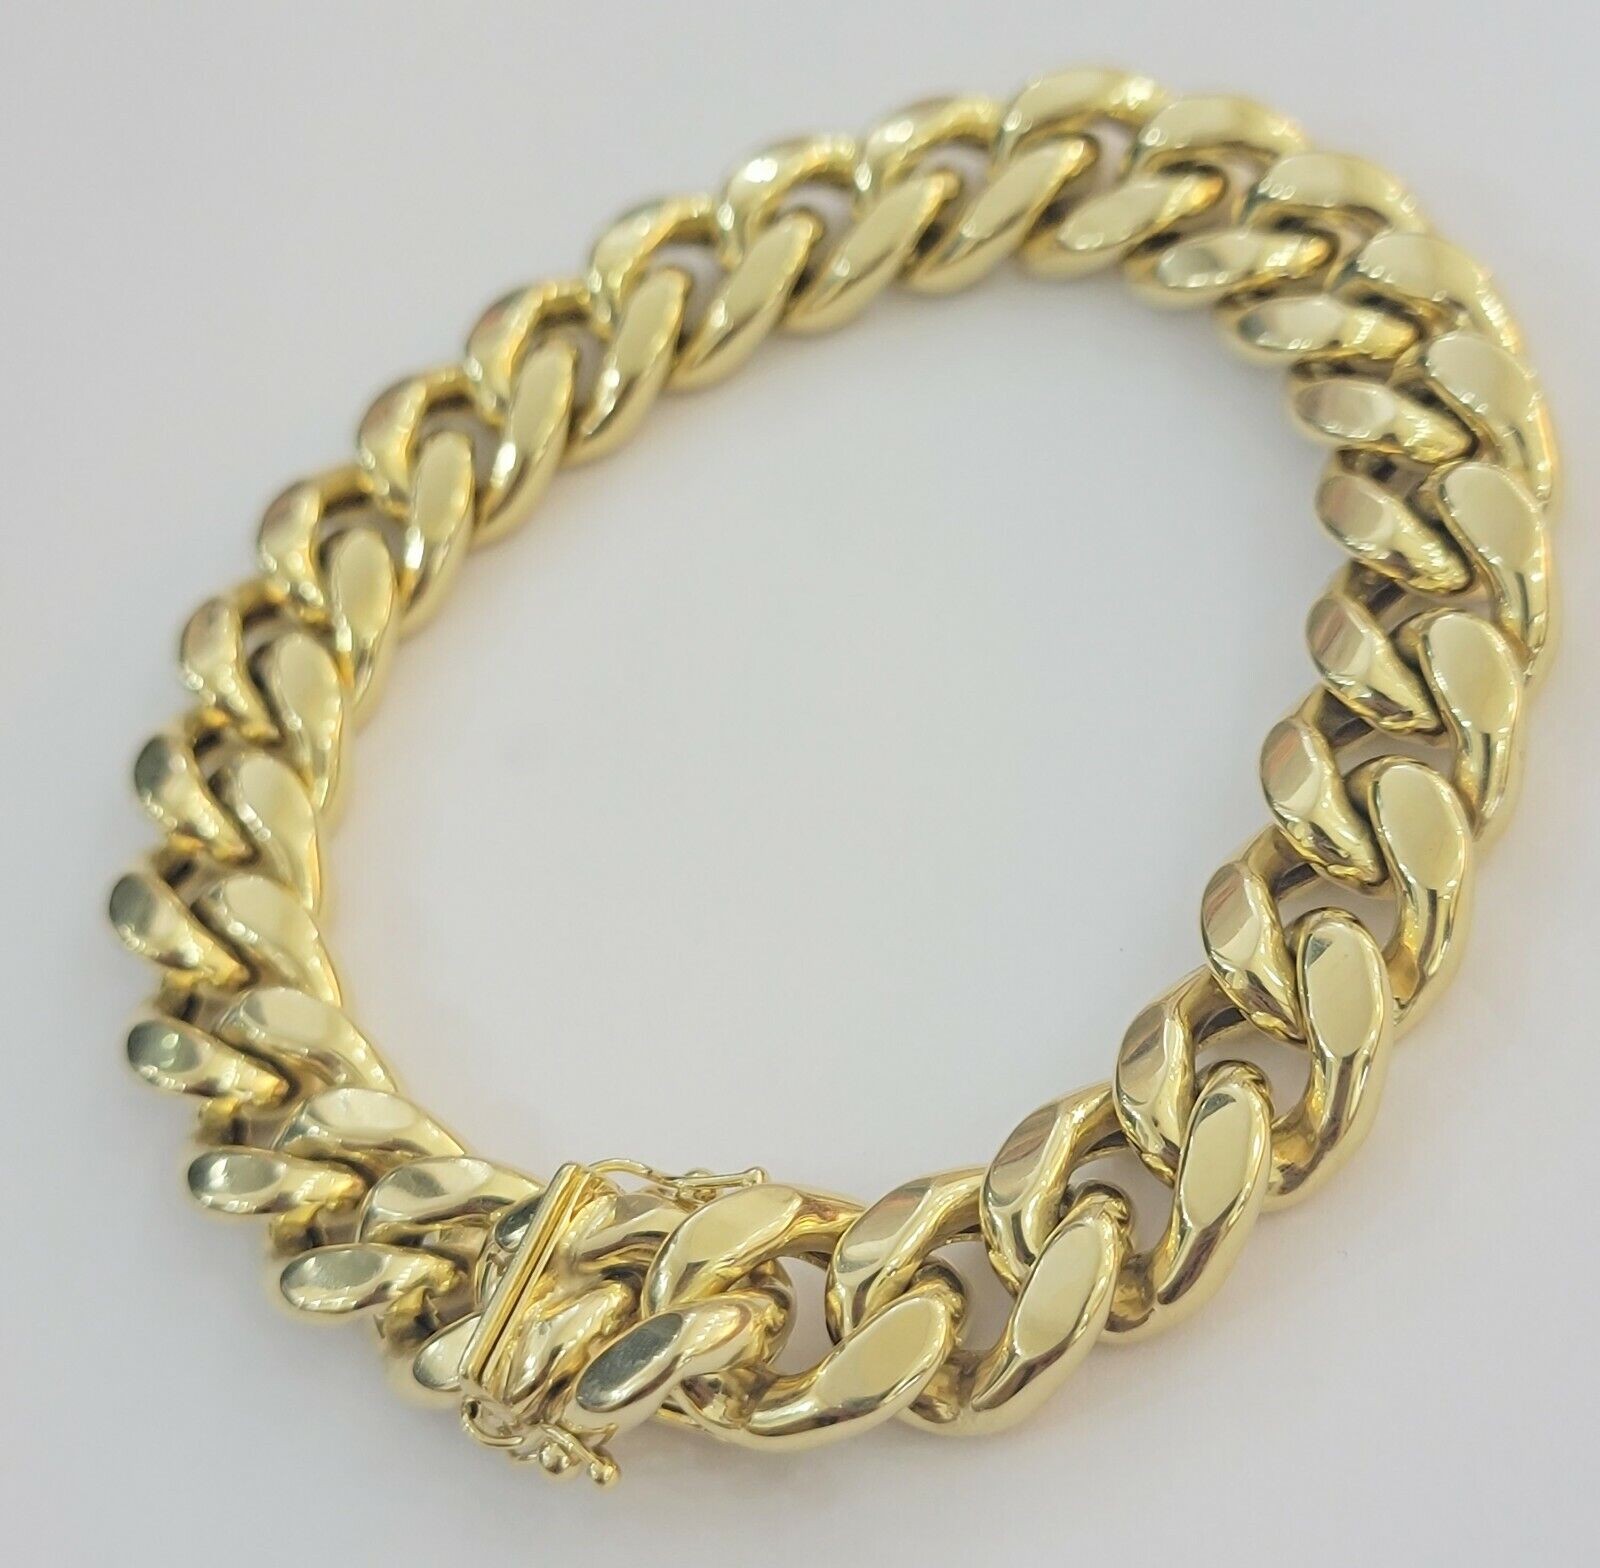 REAL Mens 10k Yellow Gold Miami Cuban Bracelet 7.5 Inch 13mm And Strong Links